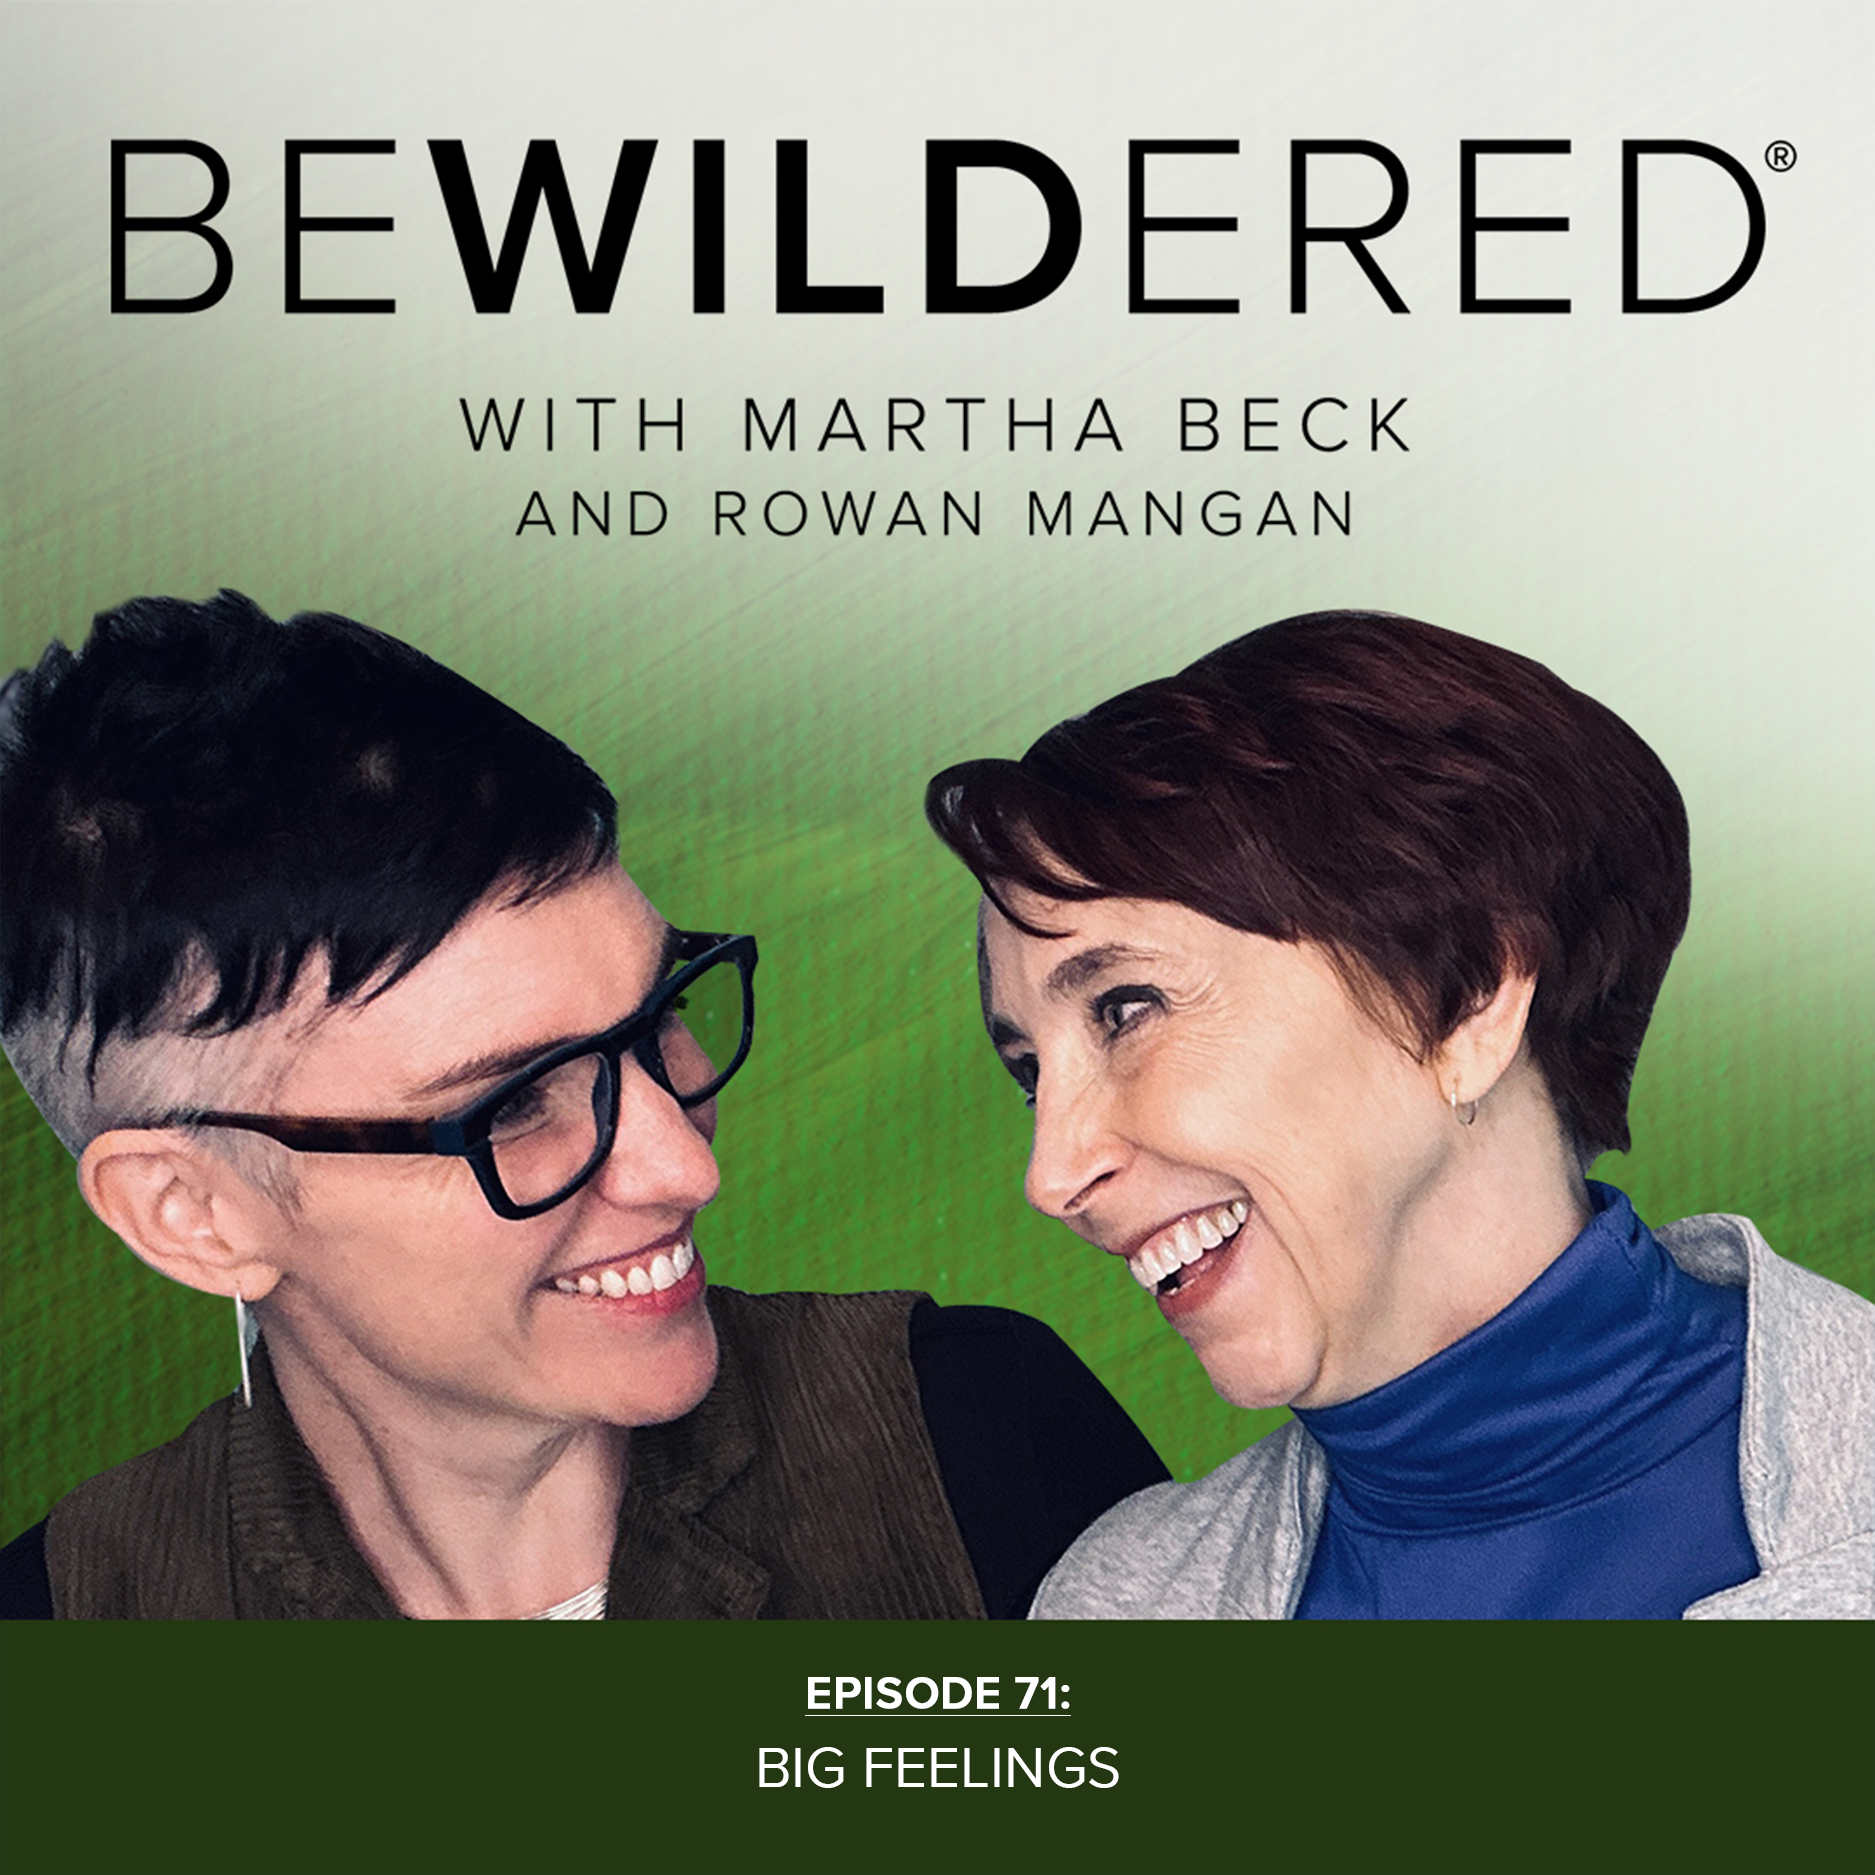 Image for Episode #71 Big Feelings for the Bewildered Podcast with Martha Beck and Rowan Mangan